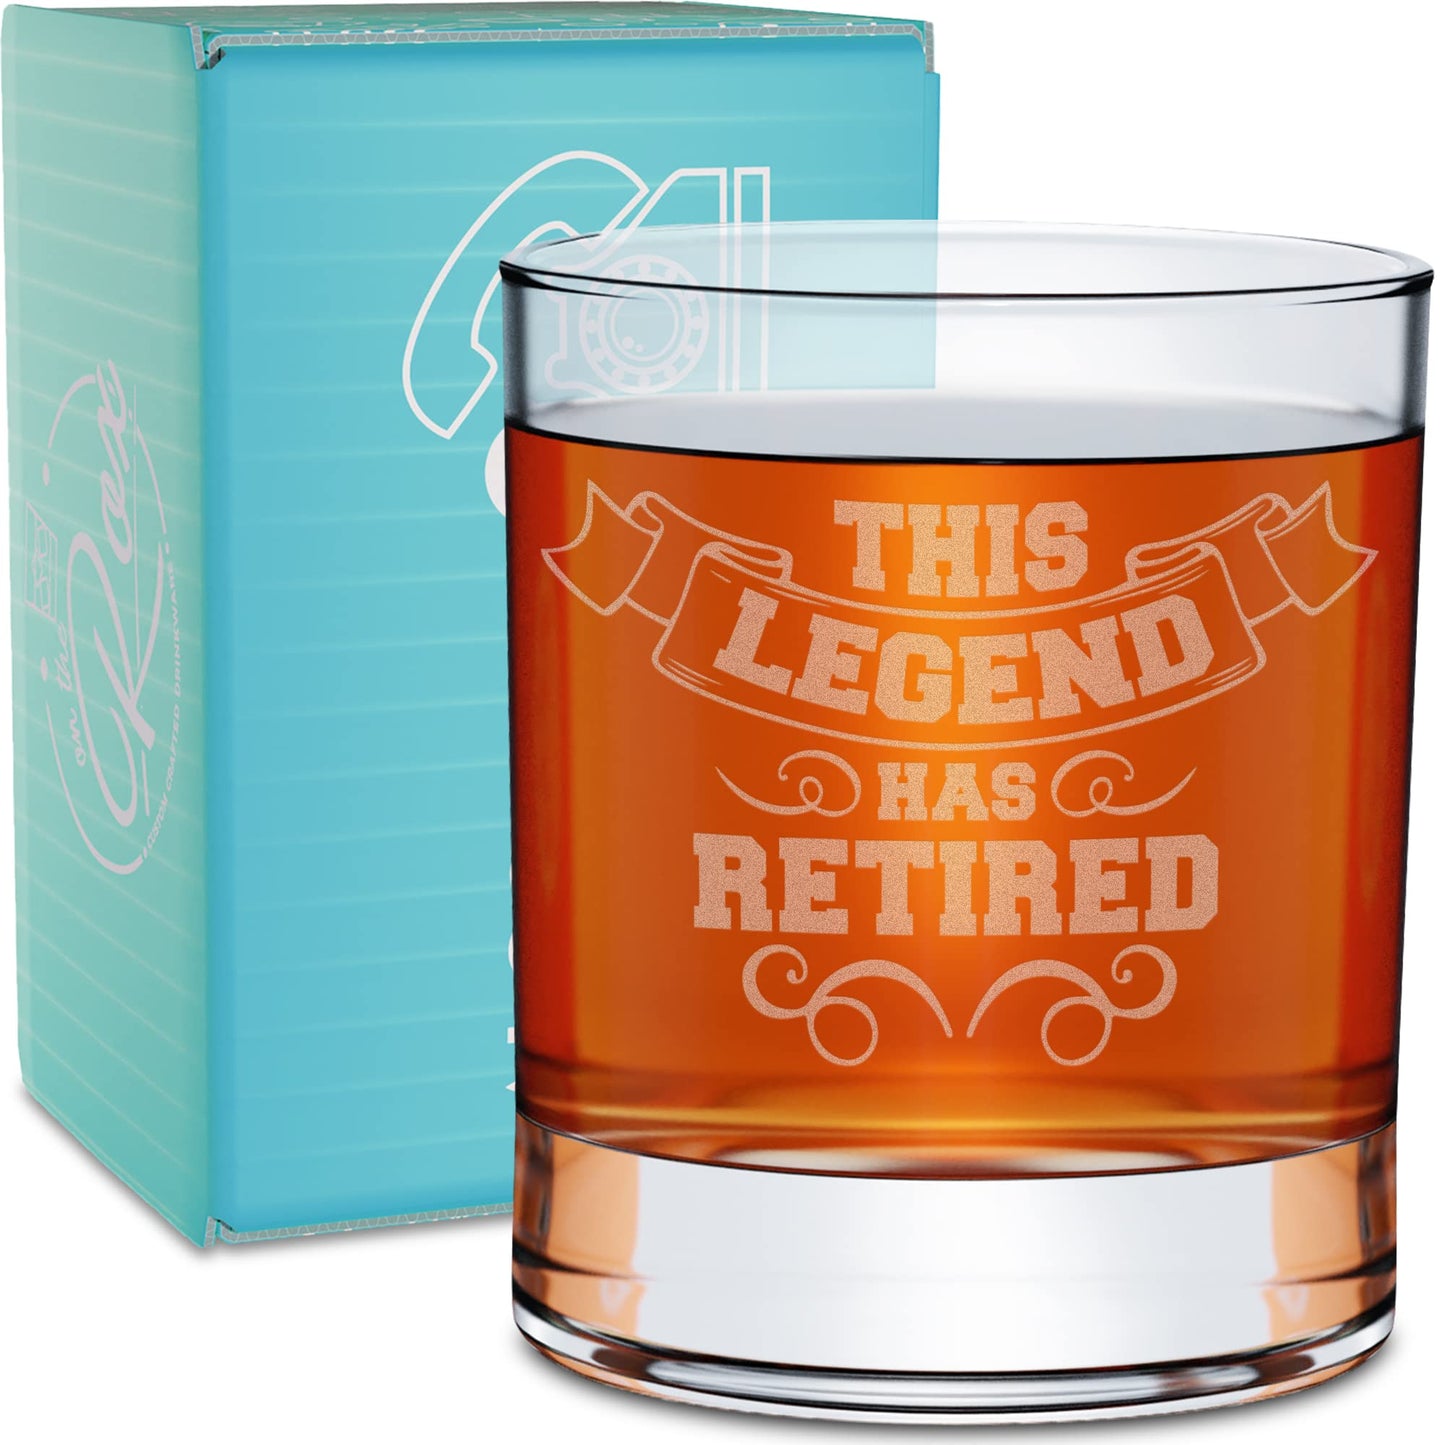 On The Rox Retirement Gifts For Men - Permanently Engraved 11 oz Glass - “This Legend Has Retired” Funny Retirement Gag Gift Idea- Wish A Happy Retirement for a Coworker/Boss/Friend